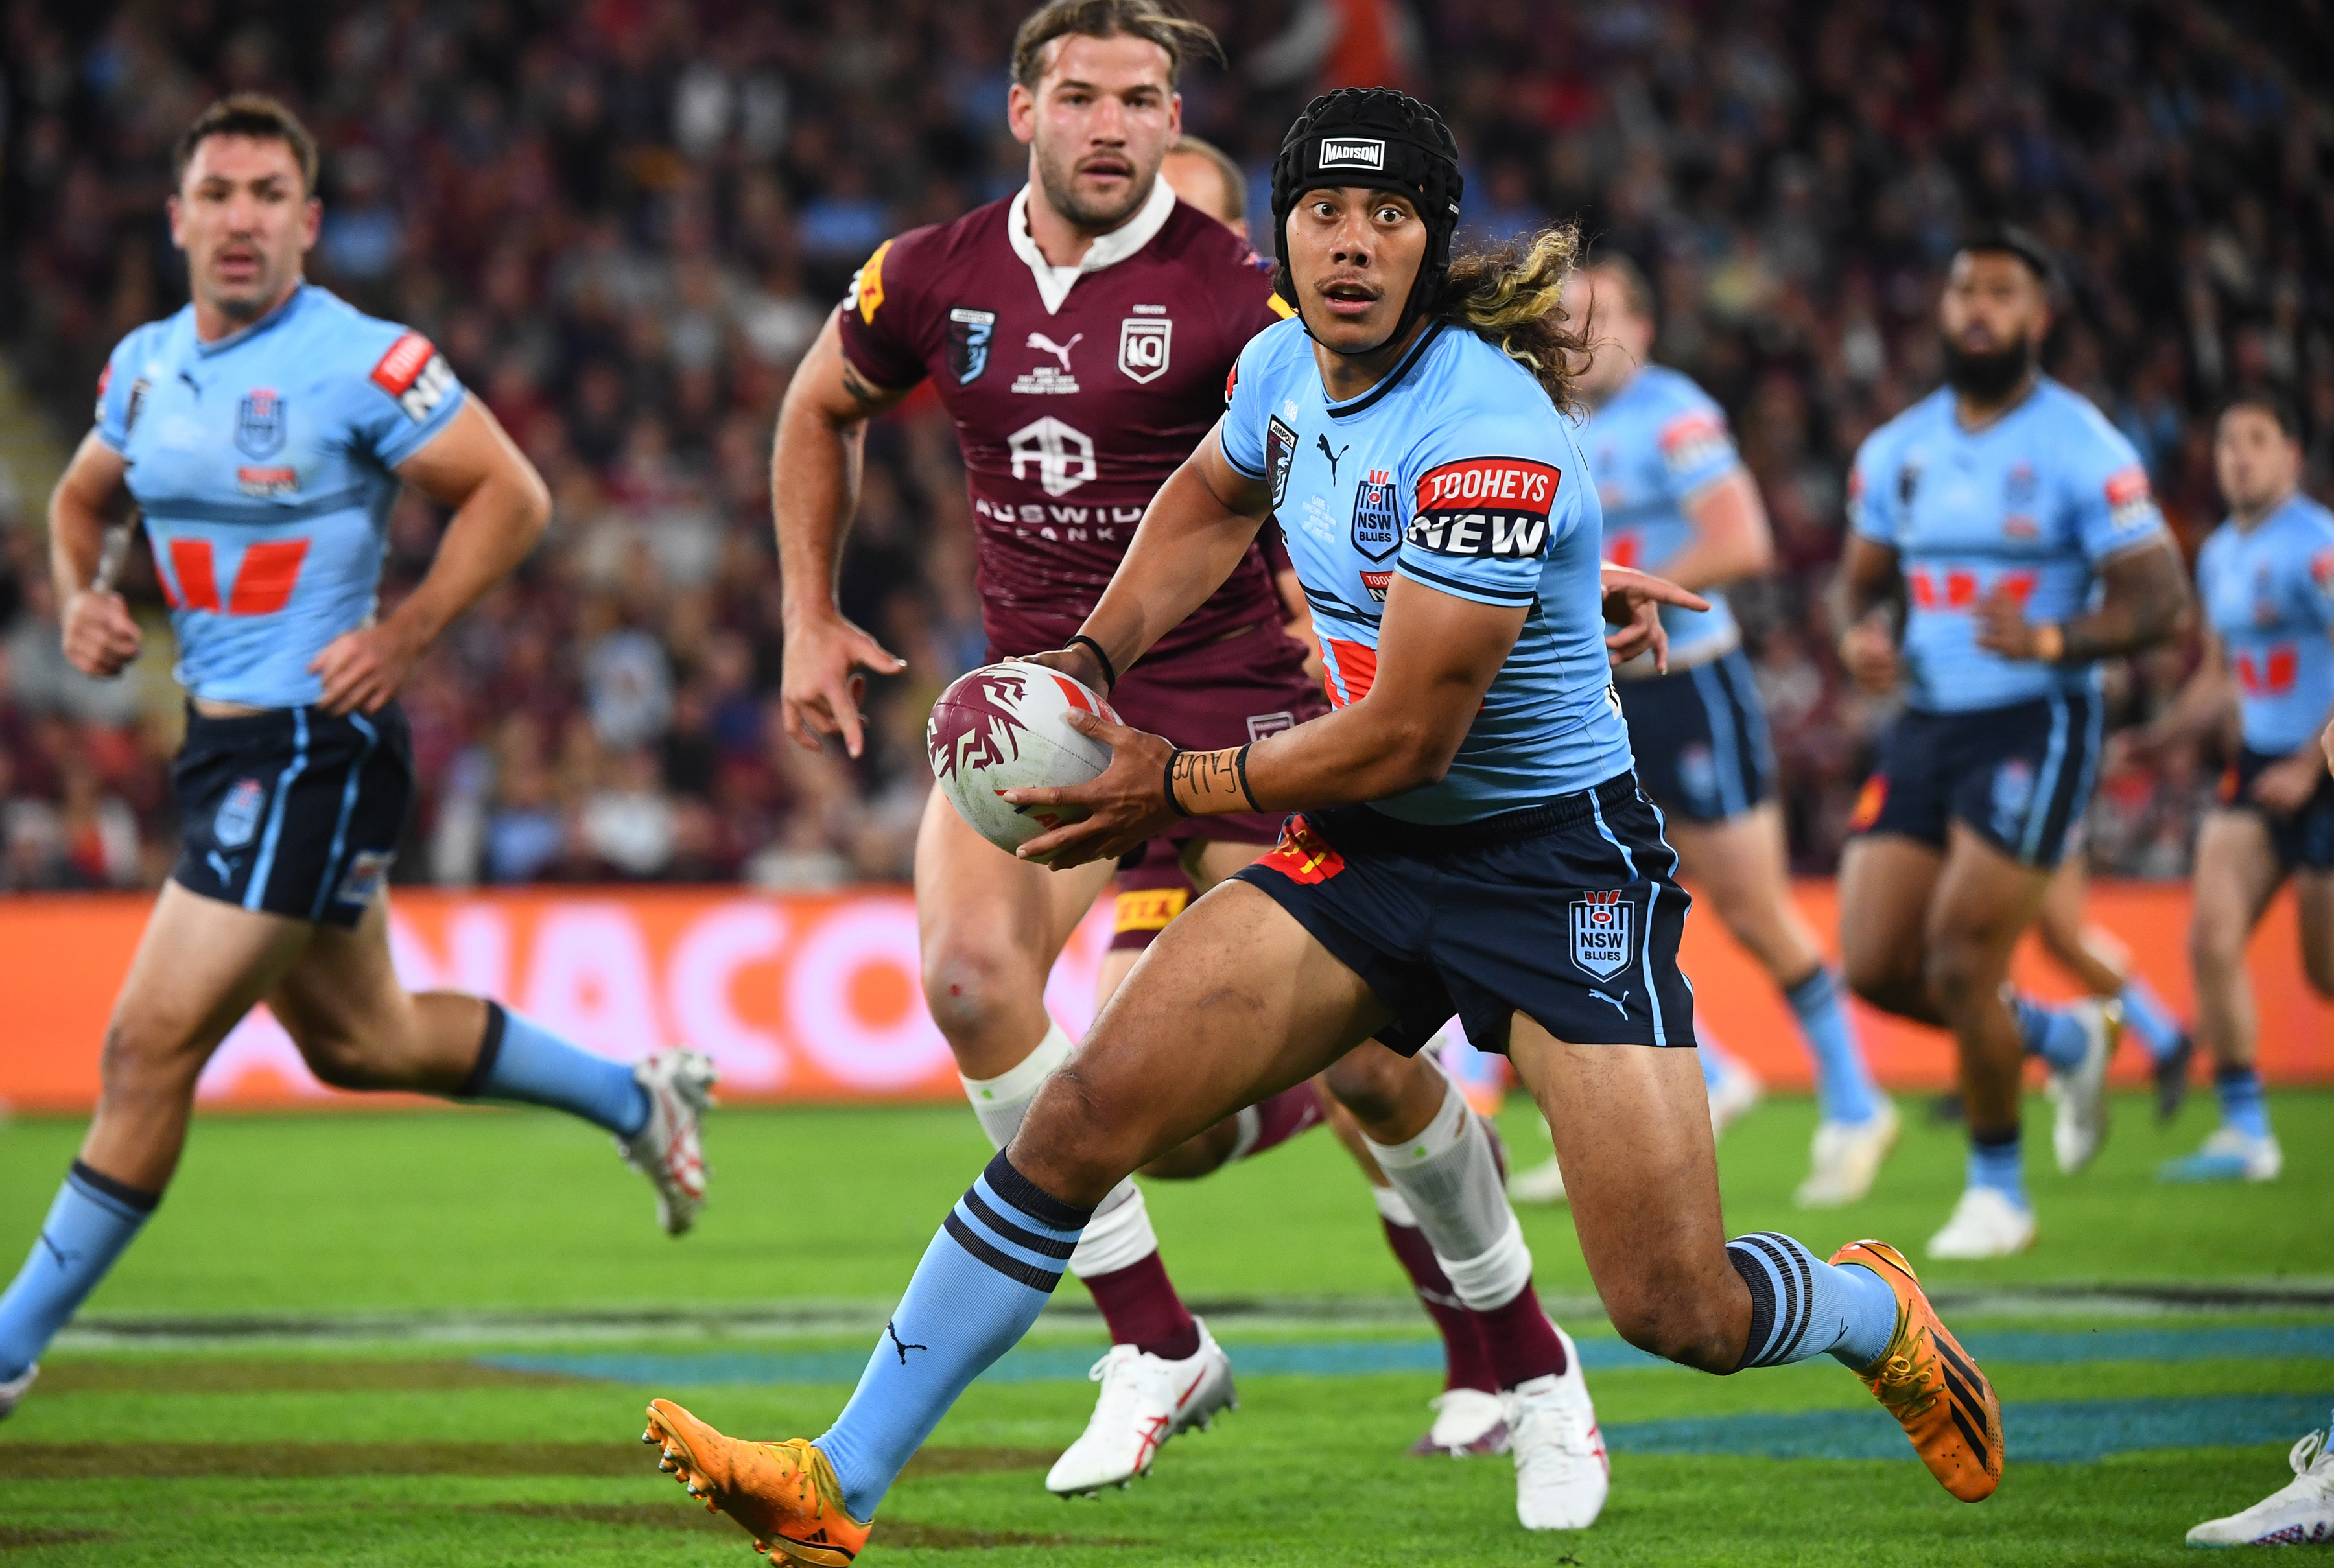 NSW Blues - In just his third start in the fullback jersey at NRL